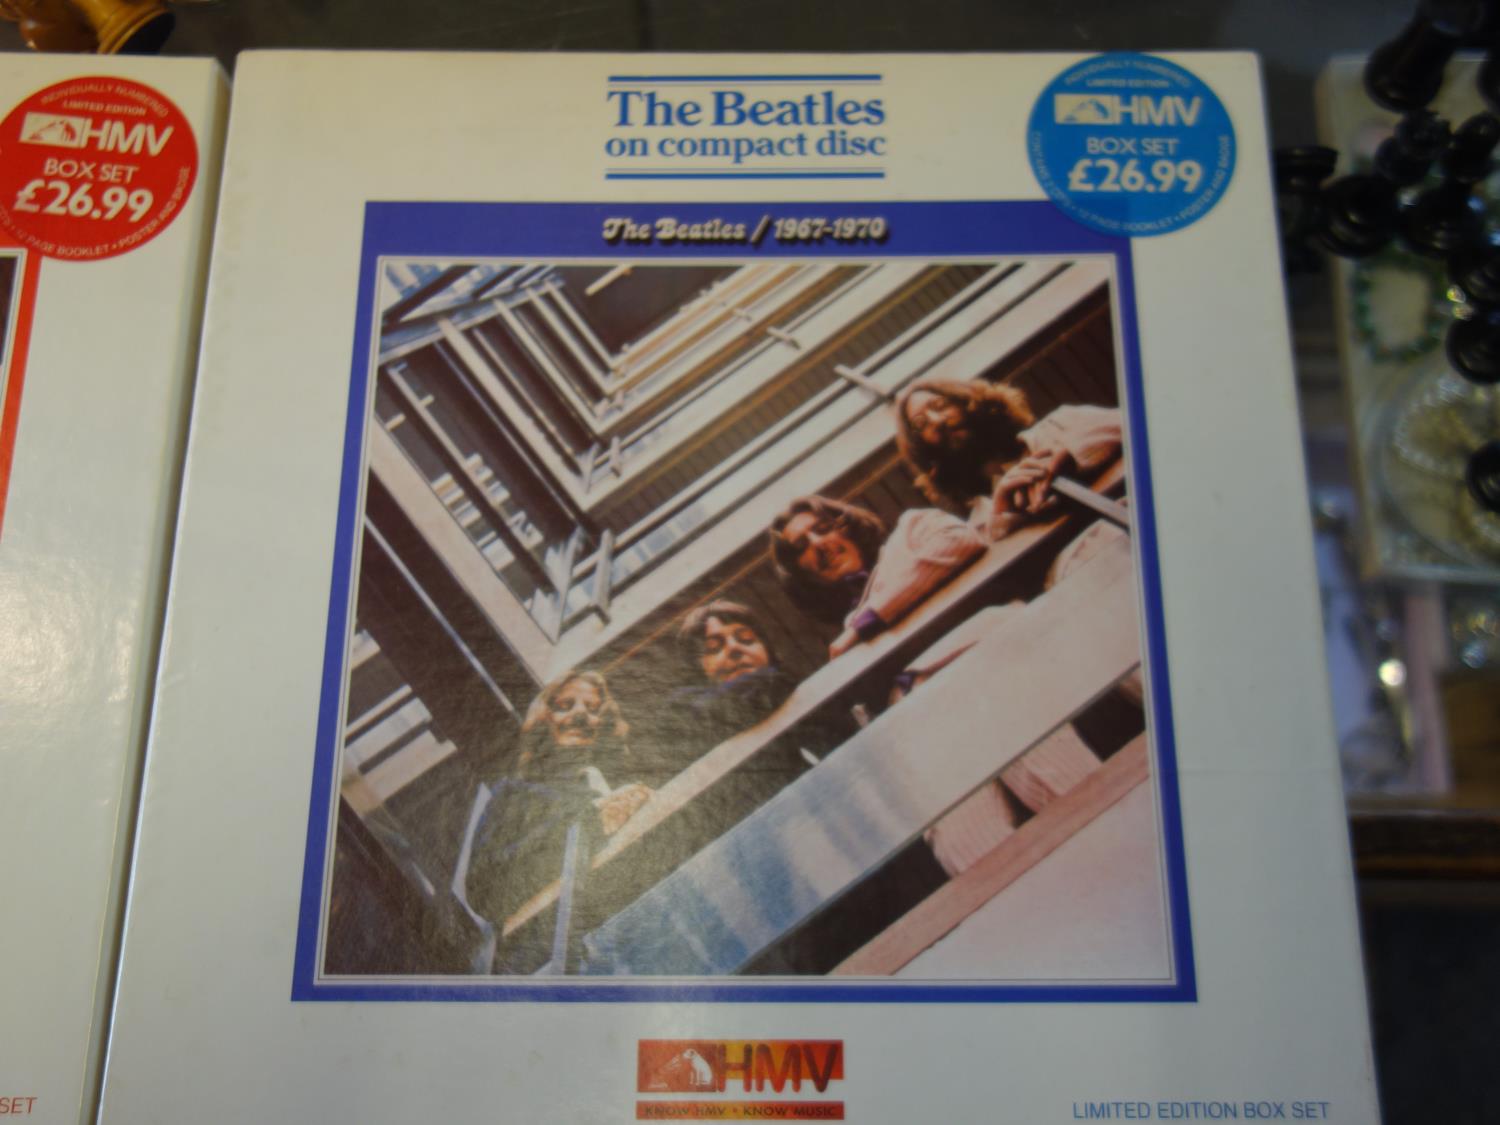 The Beatles 1962-1966-1967-1970, boxed cd set both with original badges limited edition sets - Image 3 of 4